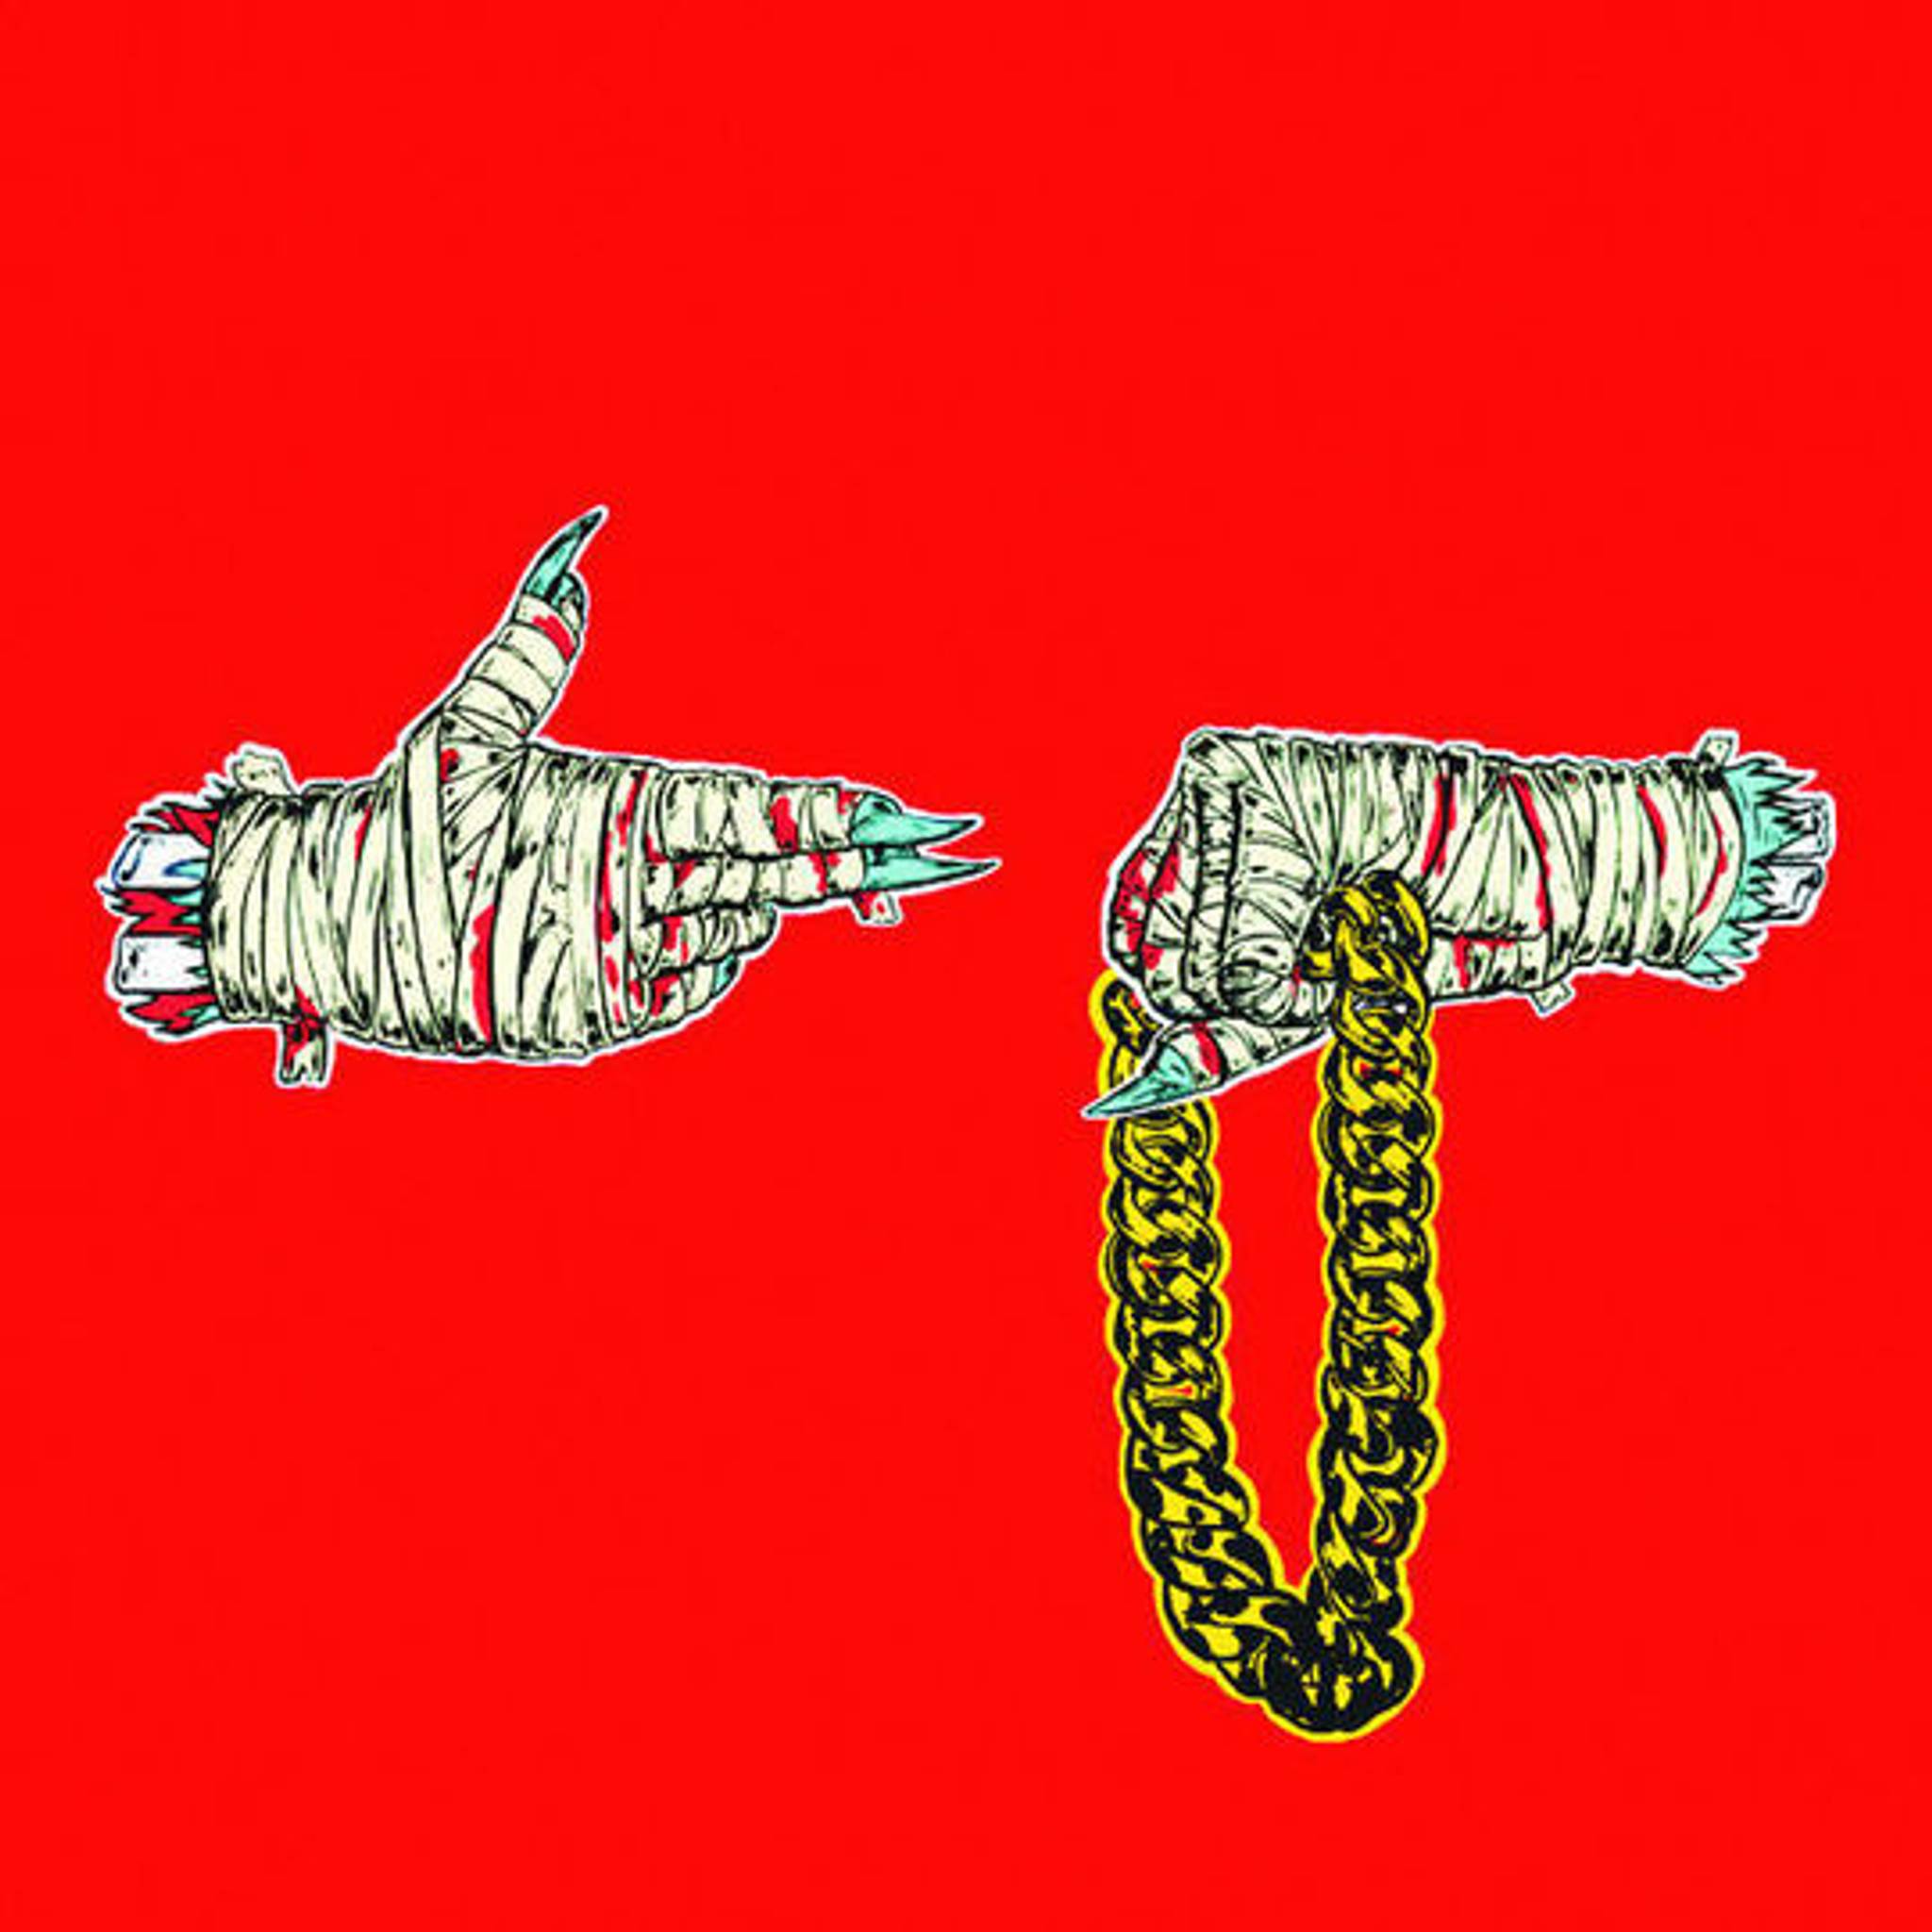 All Tagged Spring Collection - Run The Jewels